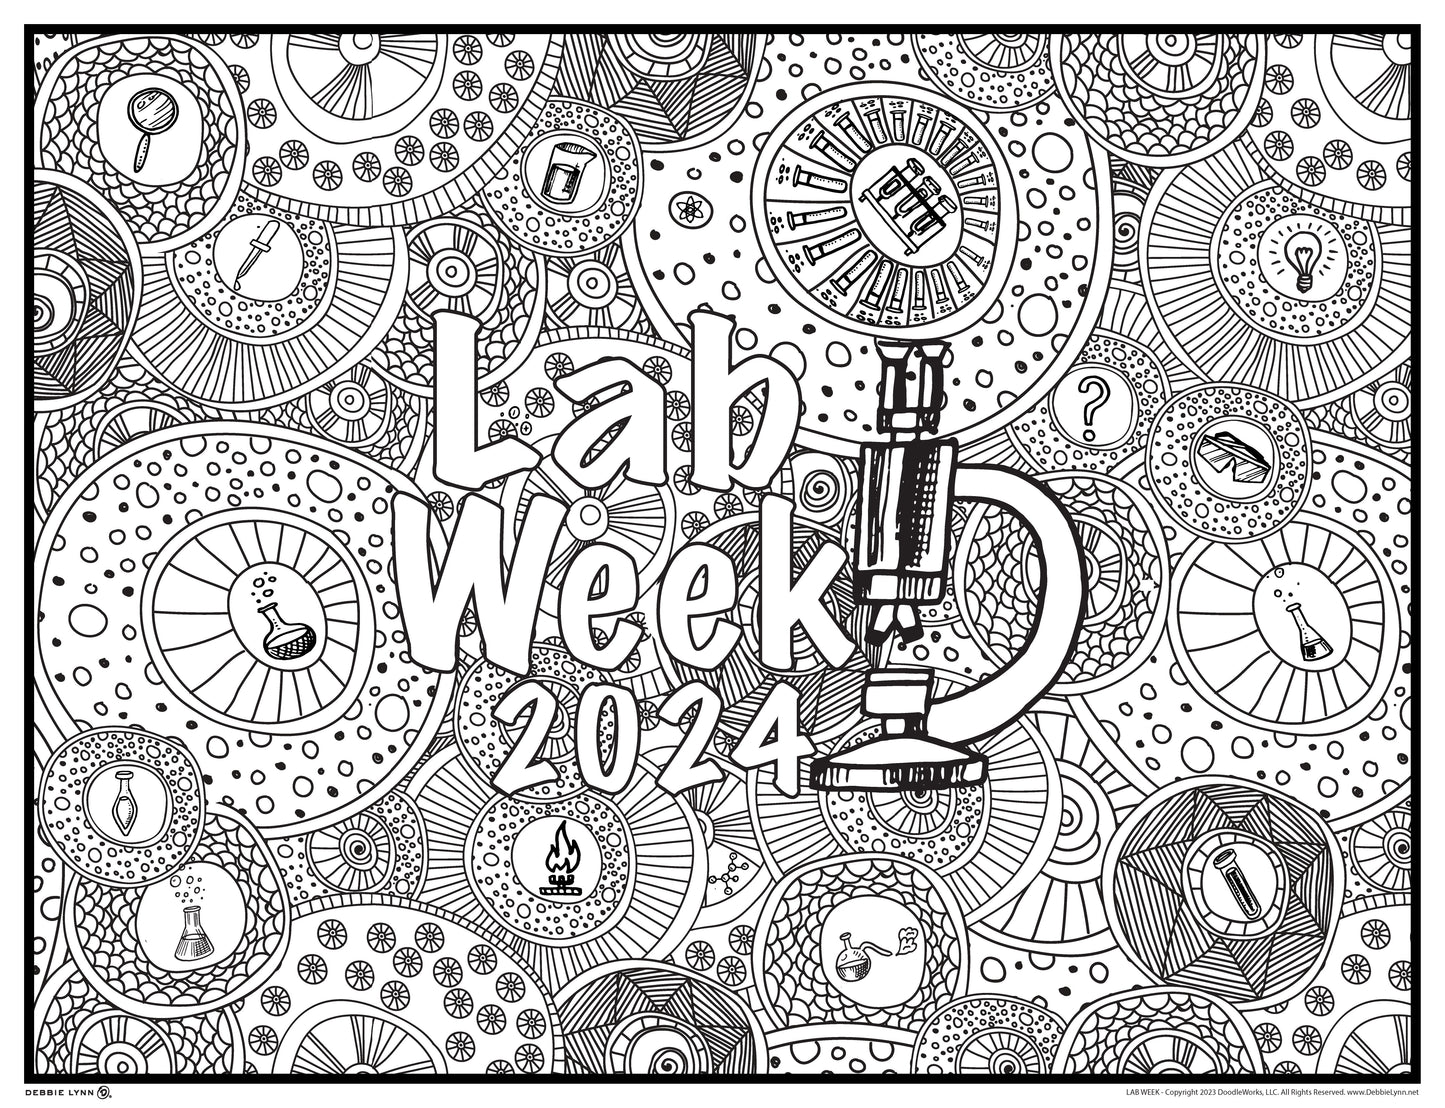 Lab Week Personalized Giant Coloring Poster 46" x 60"